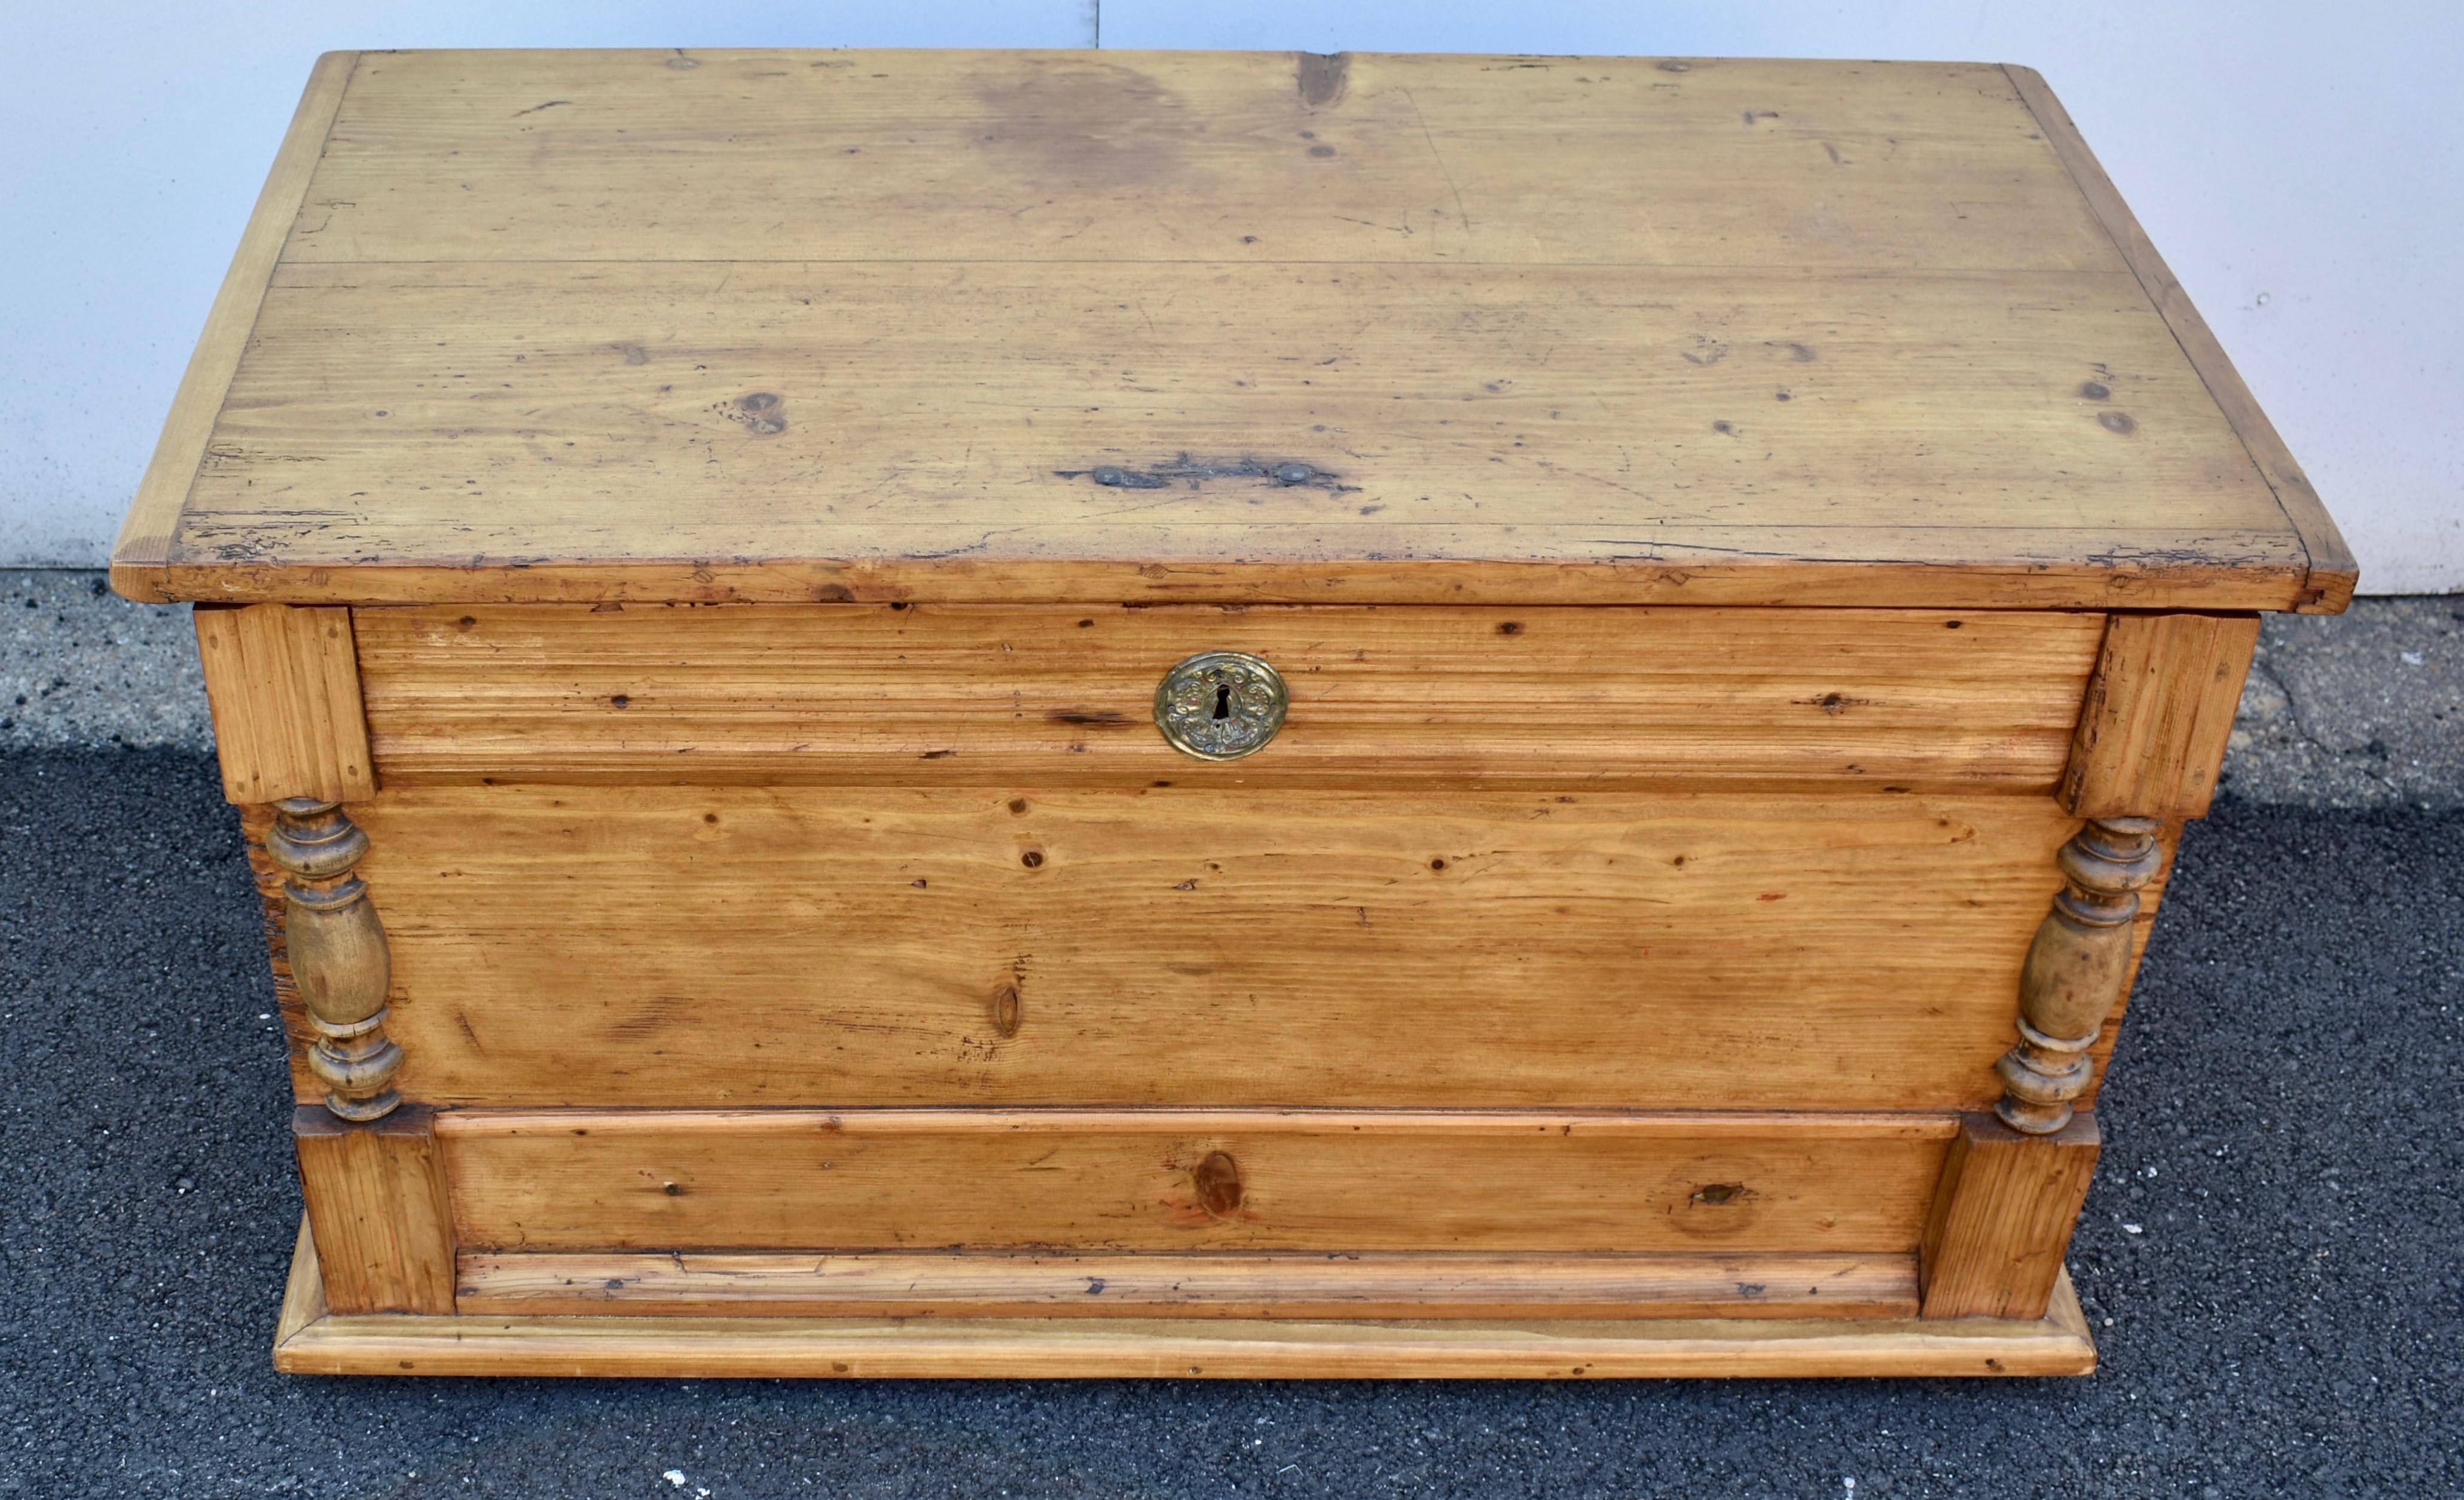 This deep and rather stately trunk is a “faux” mule chest. The front is divided into three lateral sections. The top section, with three rows of reeding and a pressed brass escutcheon plate, and the bottom,. both had knobs that disguised them as